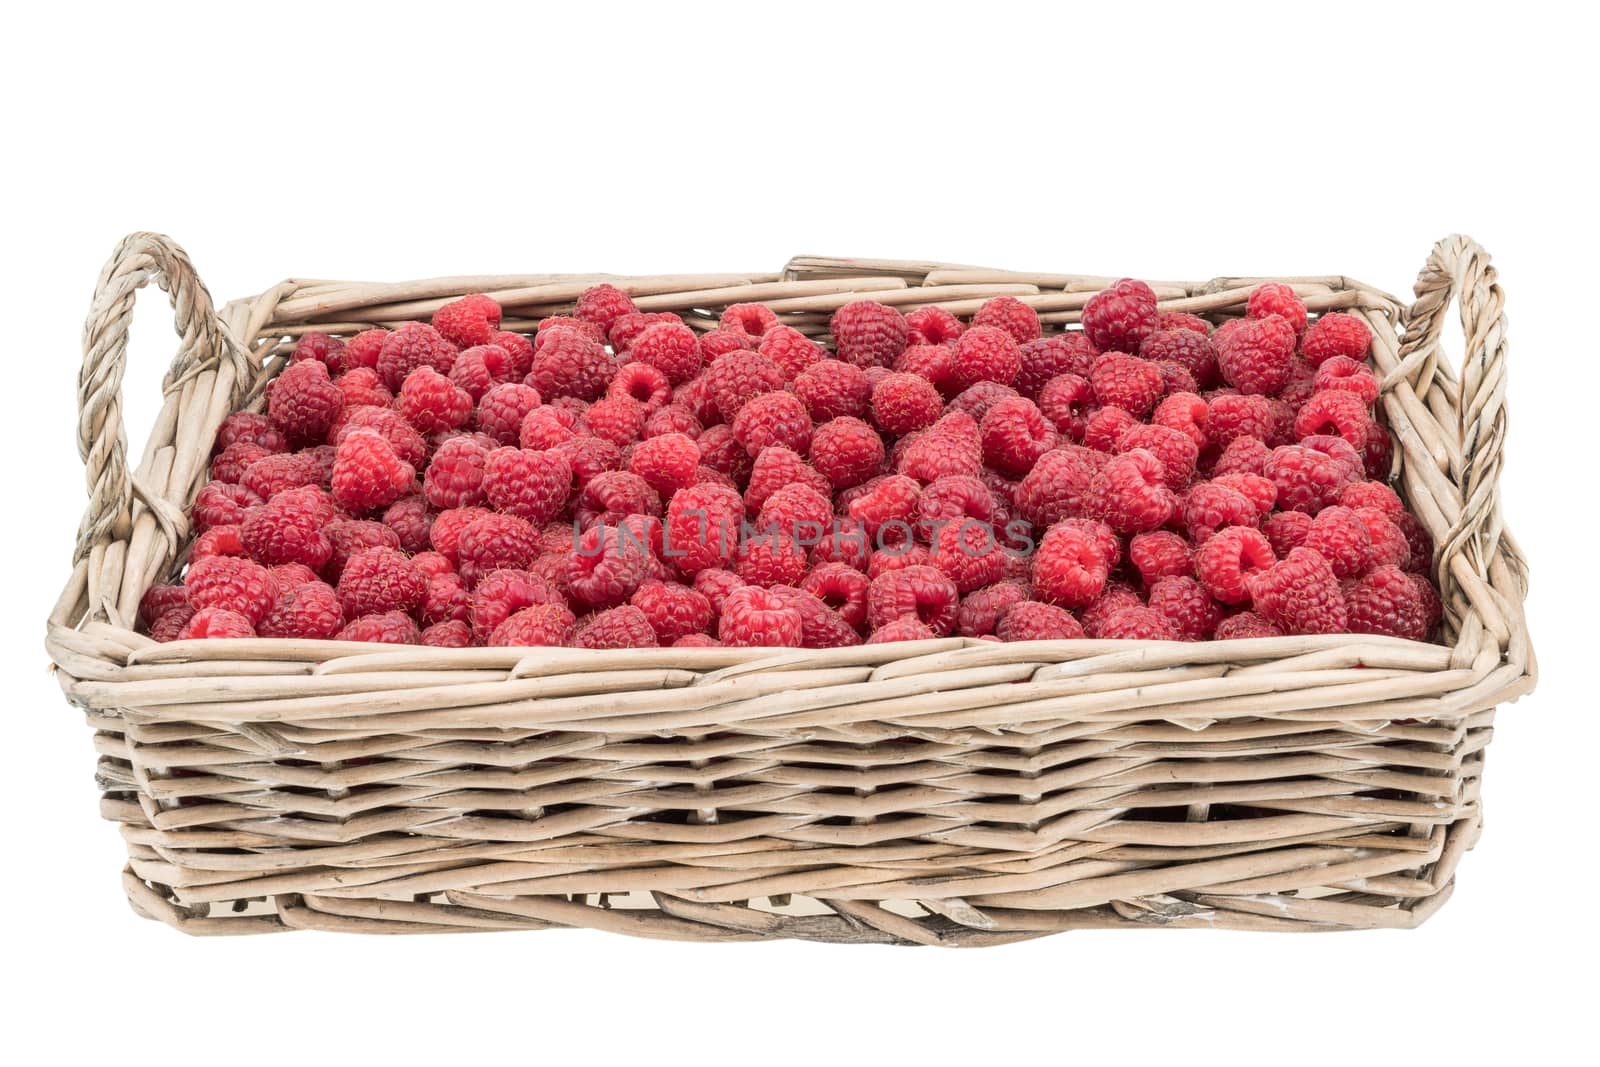 Raspberries in the basket isolated on white background. 